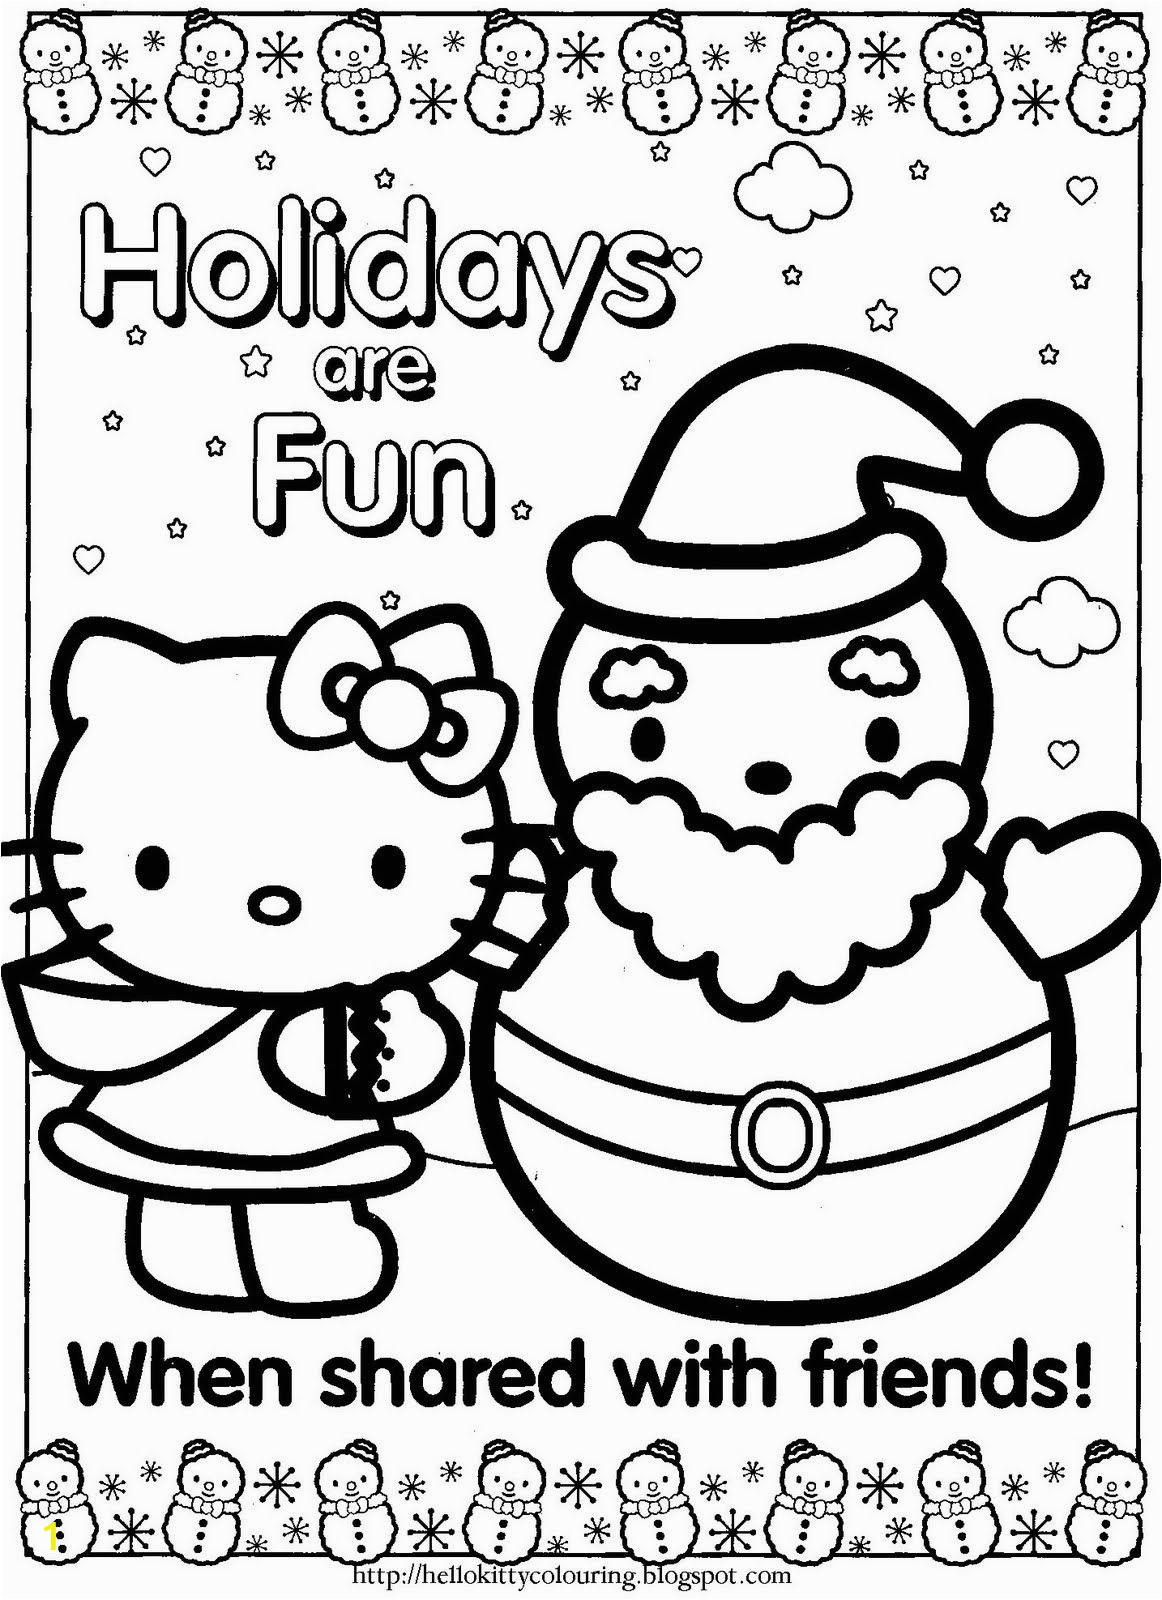 Free Downloadable Hello Kitty Coloring Pages Happy Holidays Hello Kitty Coloring Page